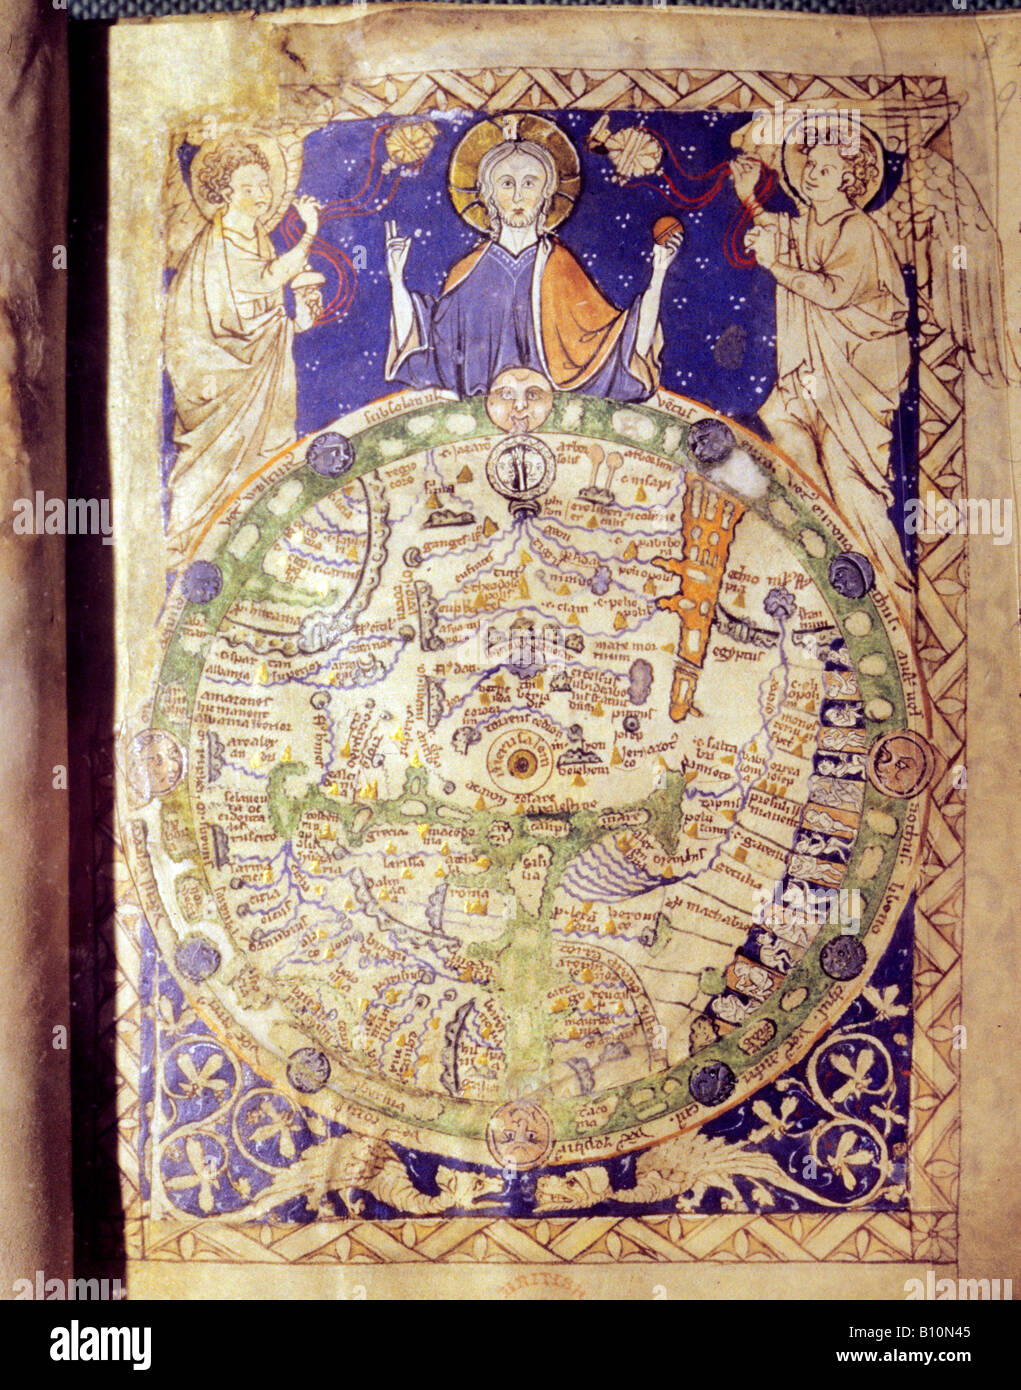 medieval-world-map-with-jerusalem-at-centre-1275-copyright-ancient-B10N45.jpg